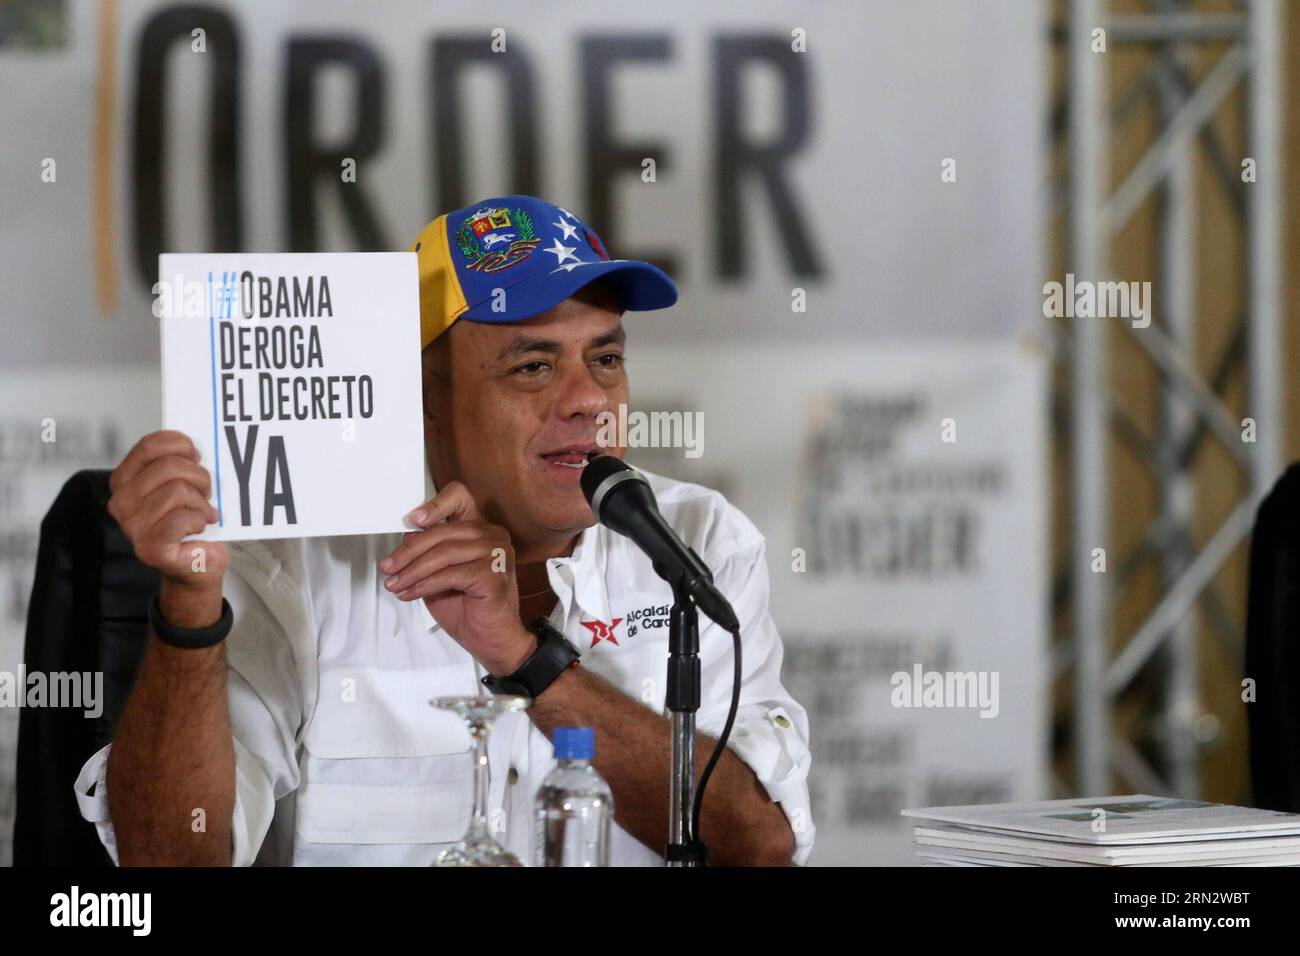 (150325) -- CARACAS, March 25, 2015 -- Jorge Rodriguez, Mayor of Caracas announces the number of signatures collected against the decree of U.S. President Barack Obama, in Caracas, Venezuela, on March 25, 2015. Venezuela s socialist government said on Wednesday it has collected more than three million signatures asking U.S. President Barack Obama to repeal measures declaring the South American country a security threat. Zurimar Campos/AVN) (vf) VENEZUELA-CARACAS-US-POLITICS-CAMPAIGN e AVN PUBLICATIONxNOTxINxCHN   Caracas March 25 2015 Jorge Rodriguez Mayor of Caracas announces The Number of Si Stock Photo